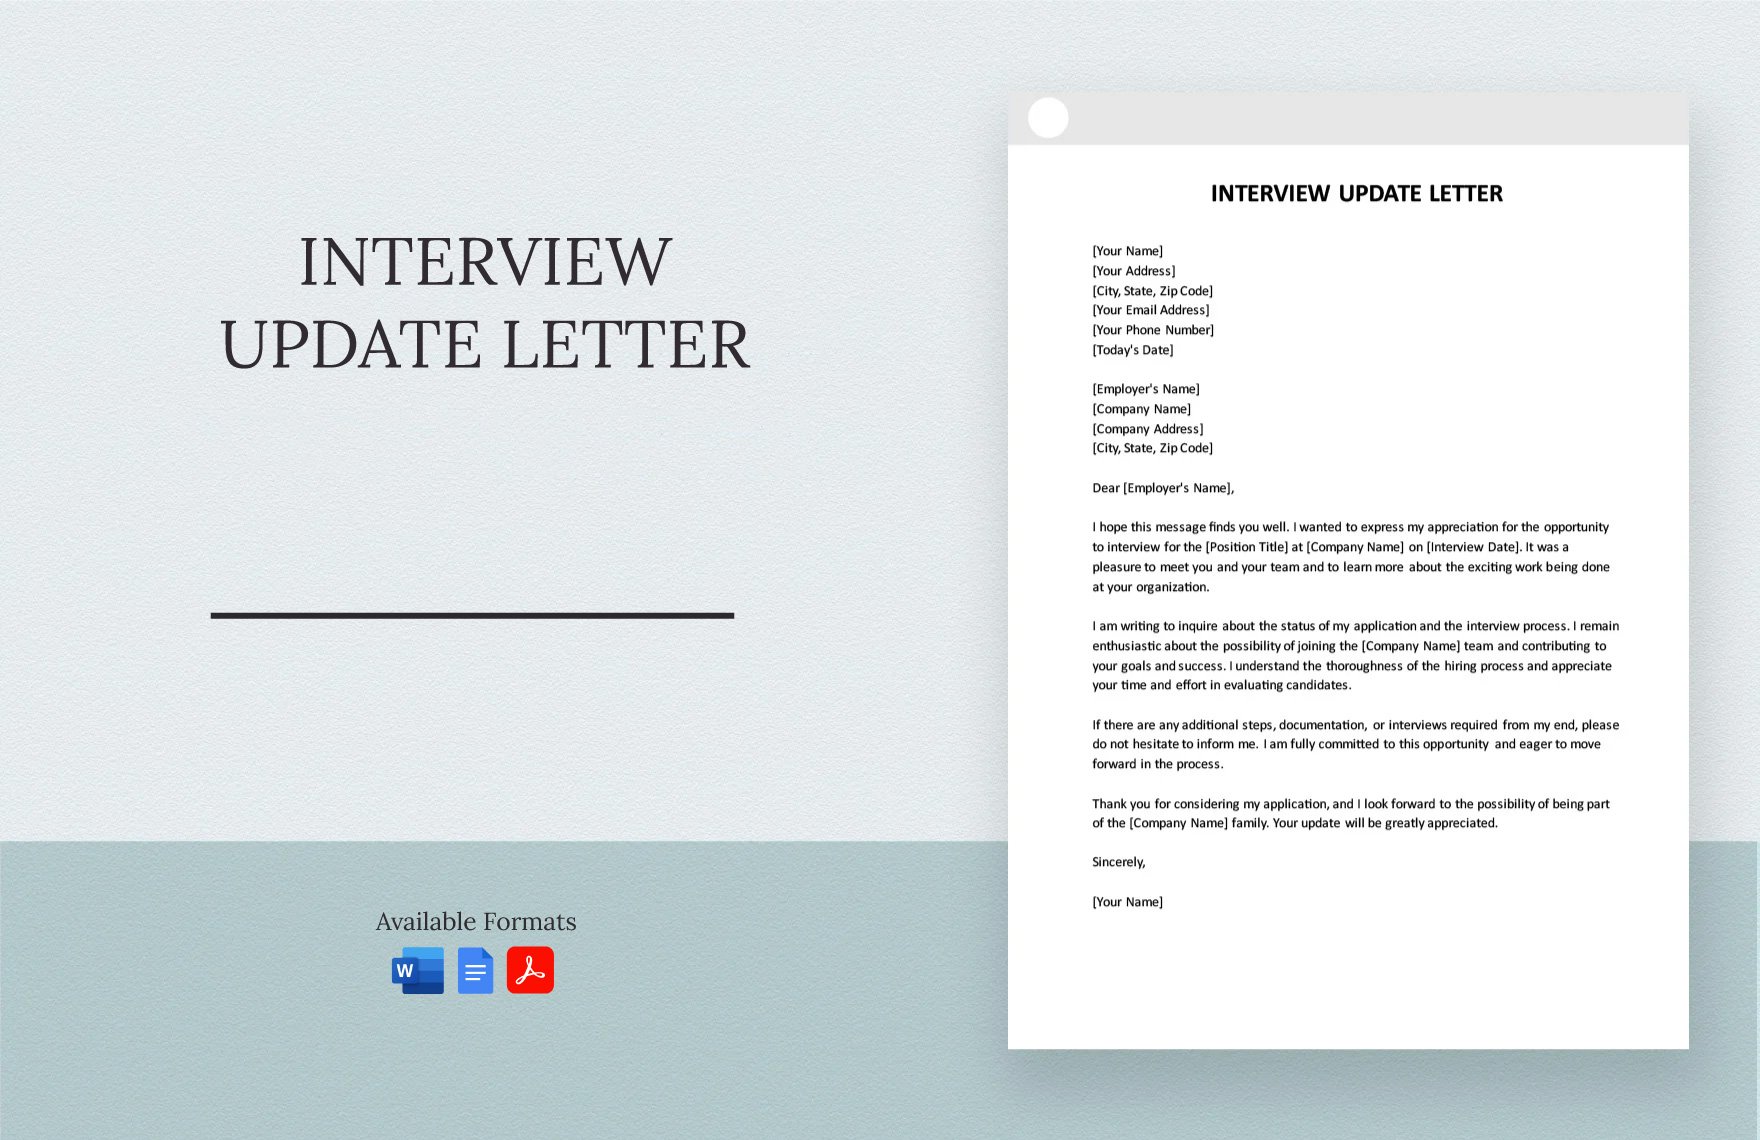 Interview Update Letter in Word, Google Docs, PDF